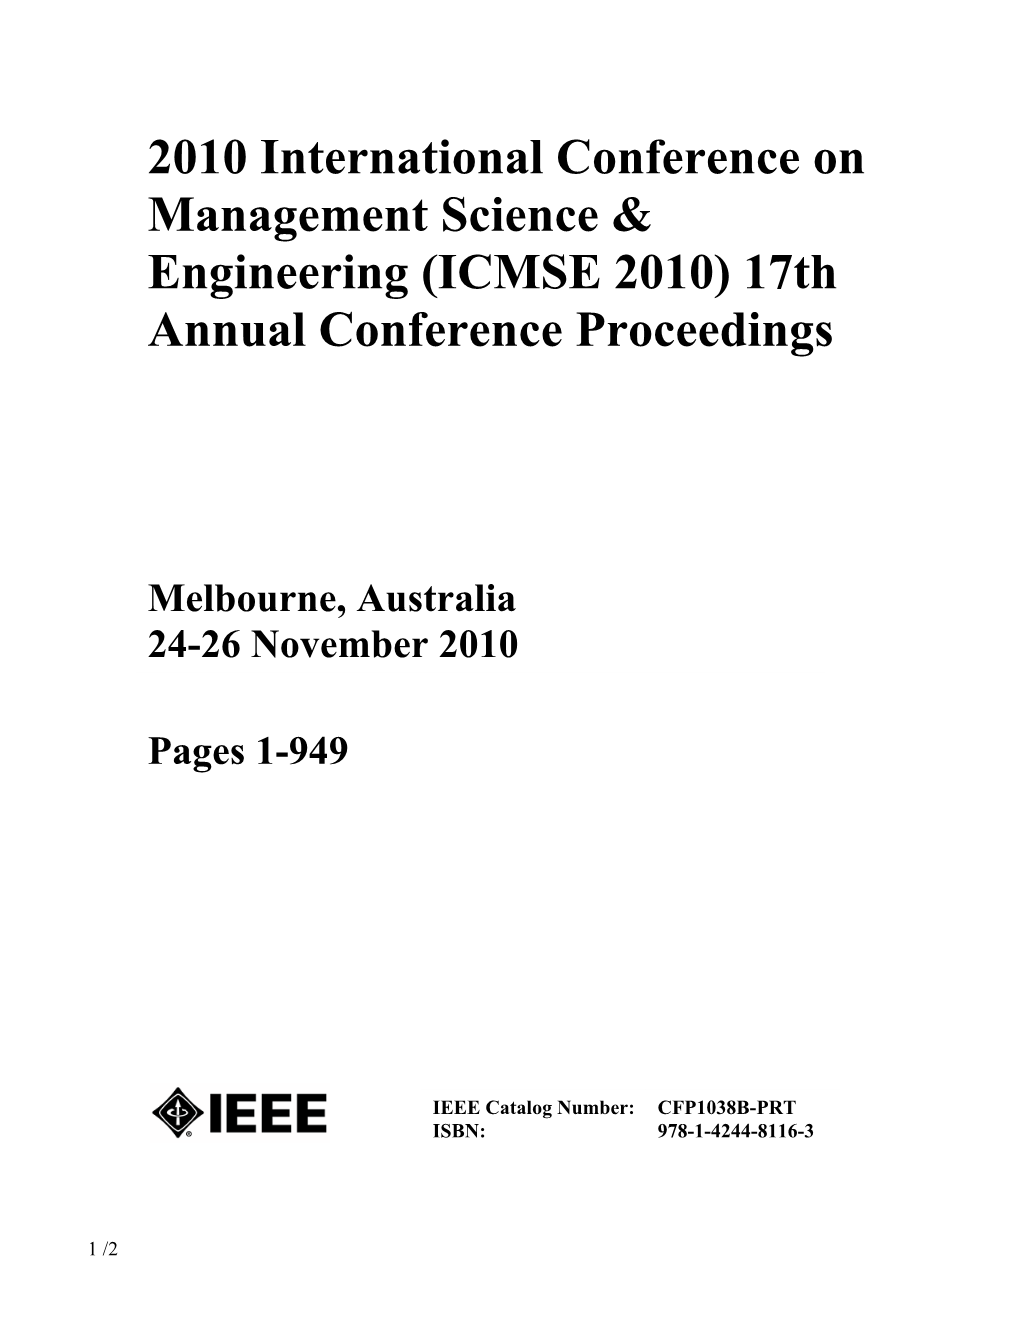 17Th Annual Conference Proceedings